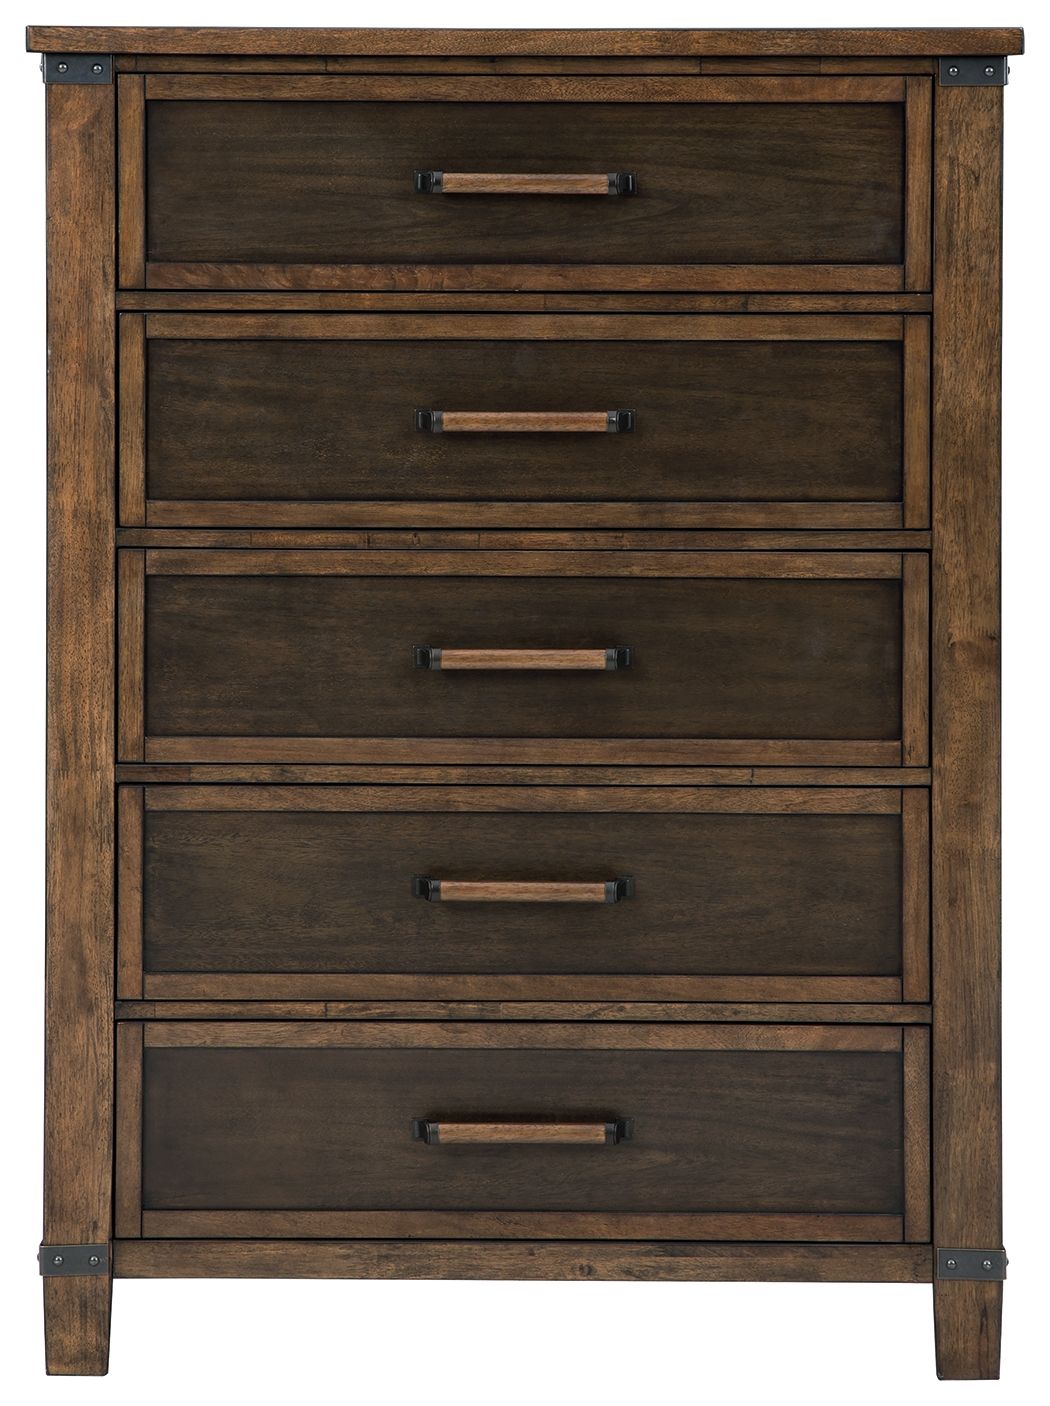 Wyattfield - Brown / Beige - Five Drawer Chest - Tony's Home Furnishings